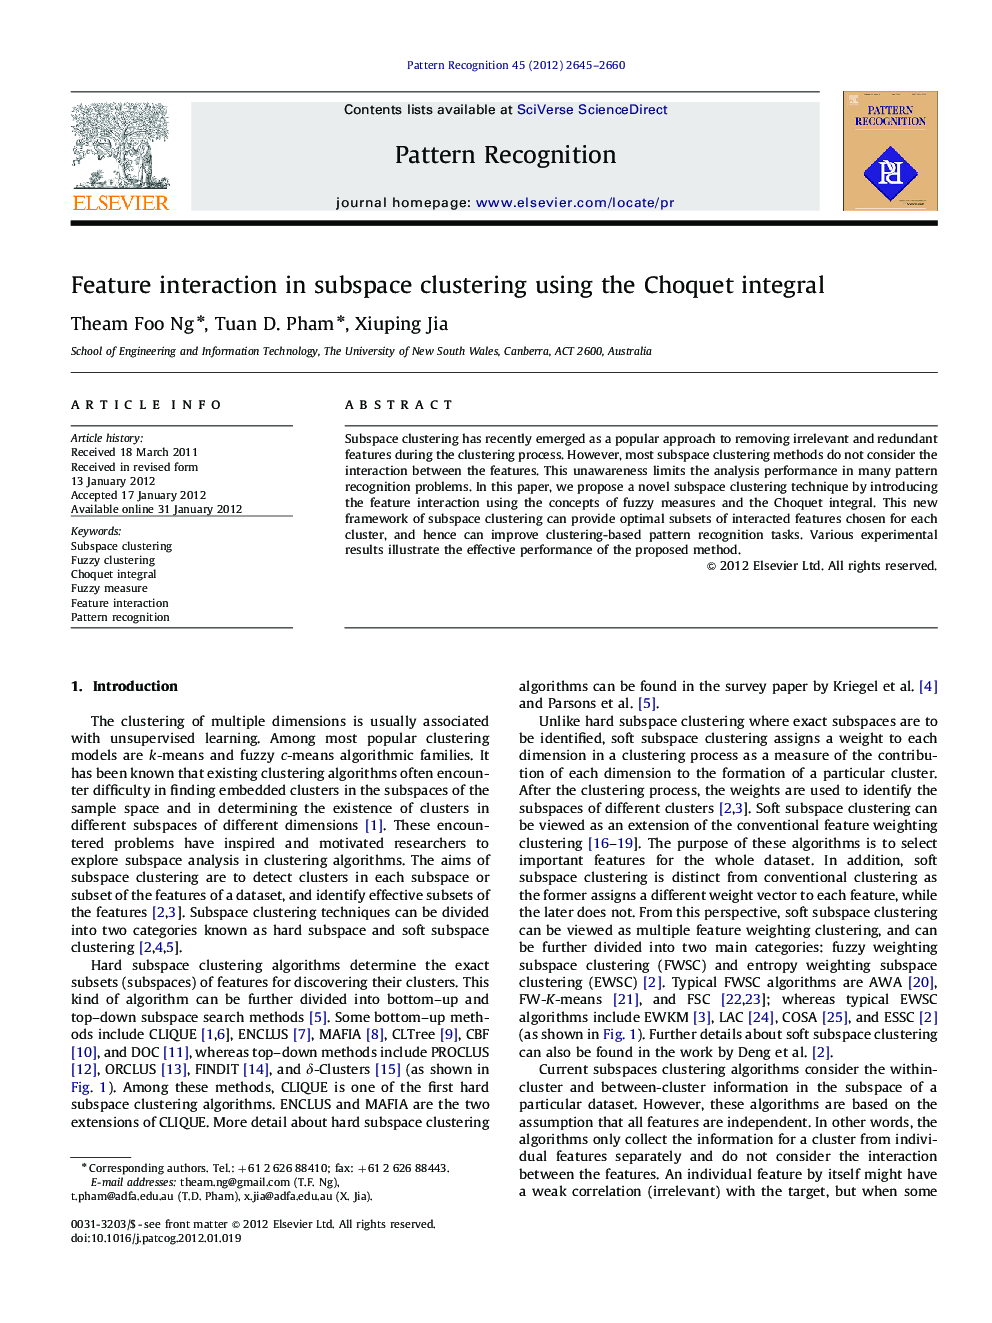 Feature interaction in subspace clustering using the Choquet integral